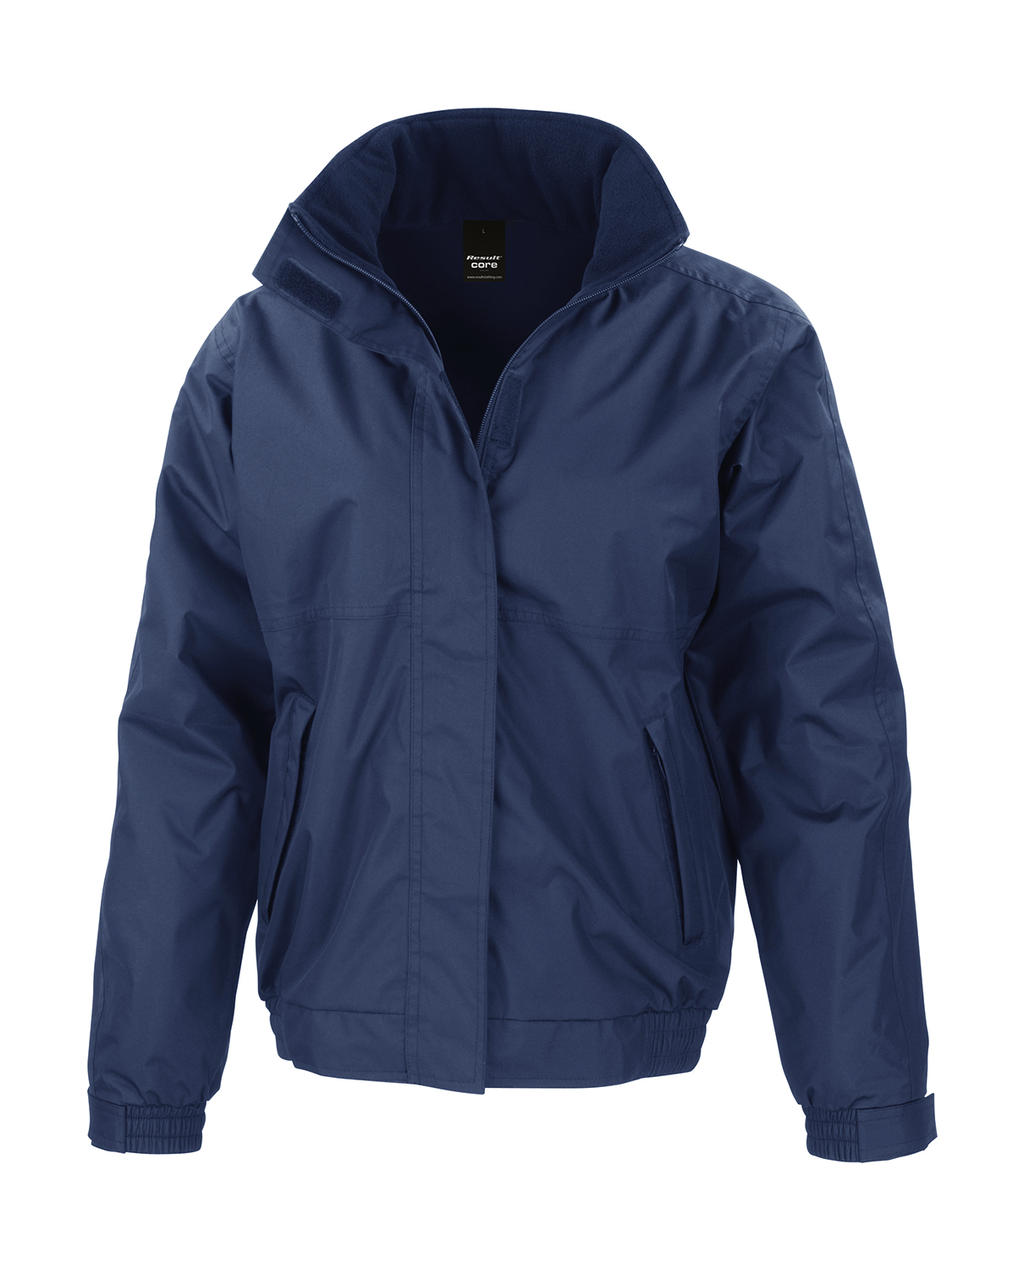  Channel Jacket in Farbe Navy